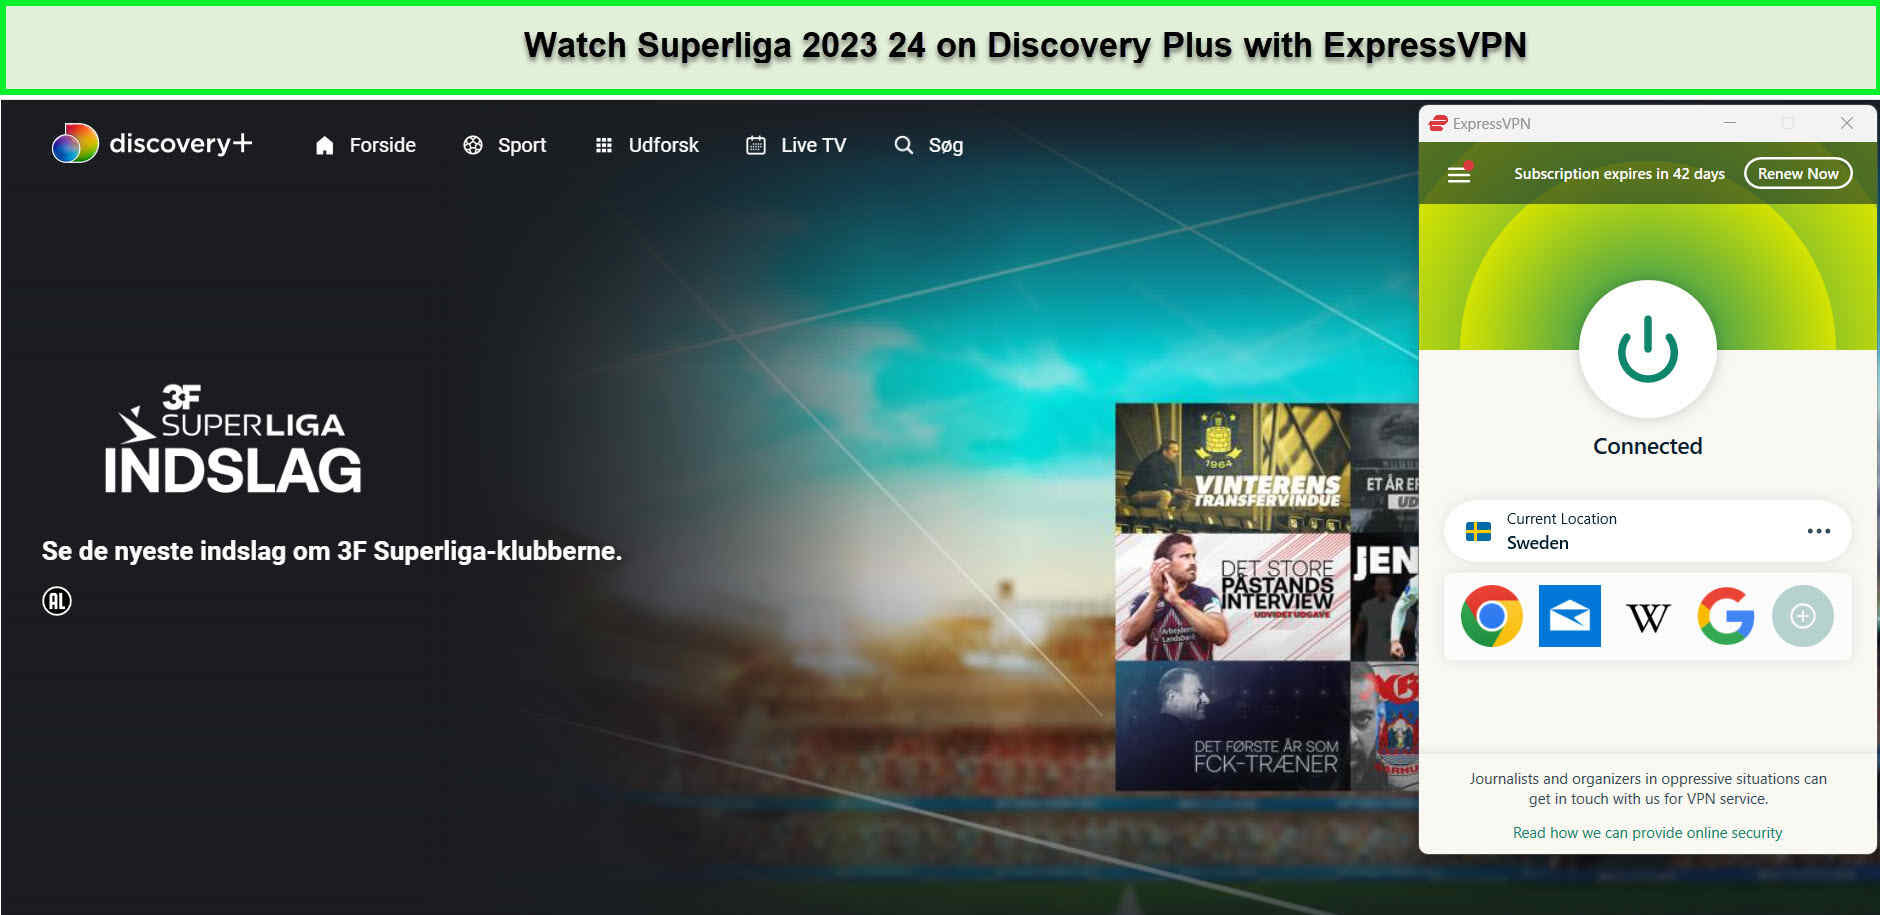 Watch-Superliga-2023-24-in-New Zealand-on-Discovery-Plus-with-ExpressVPN!